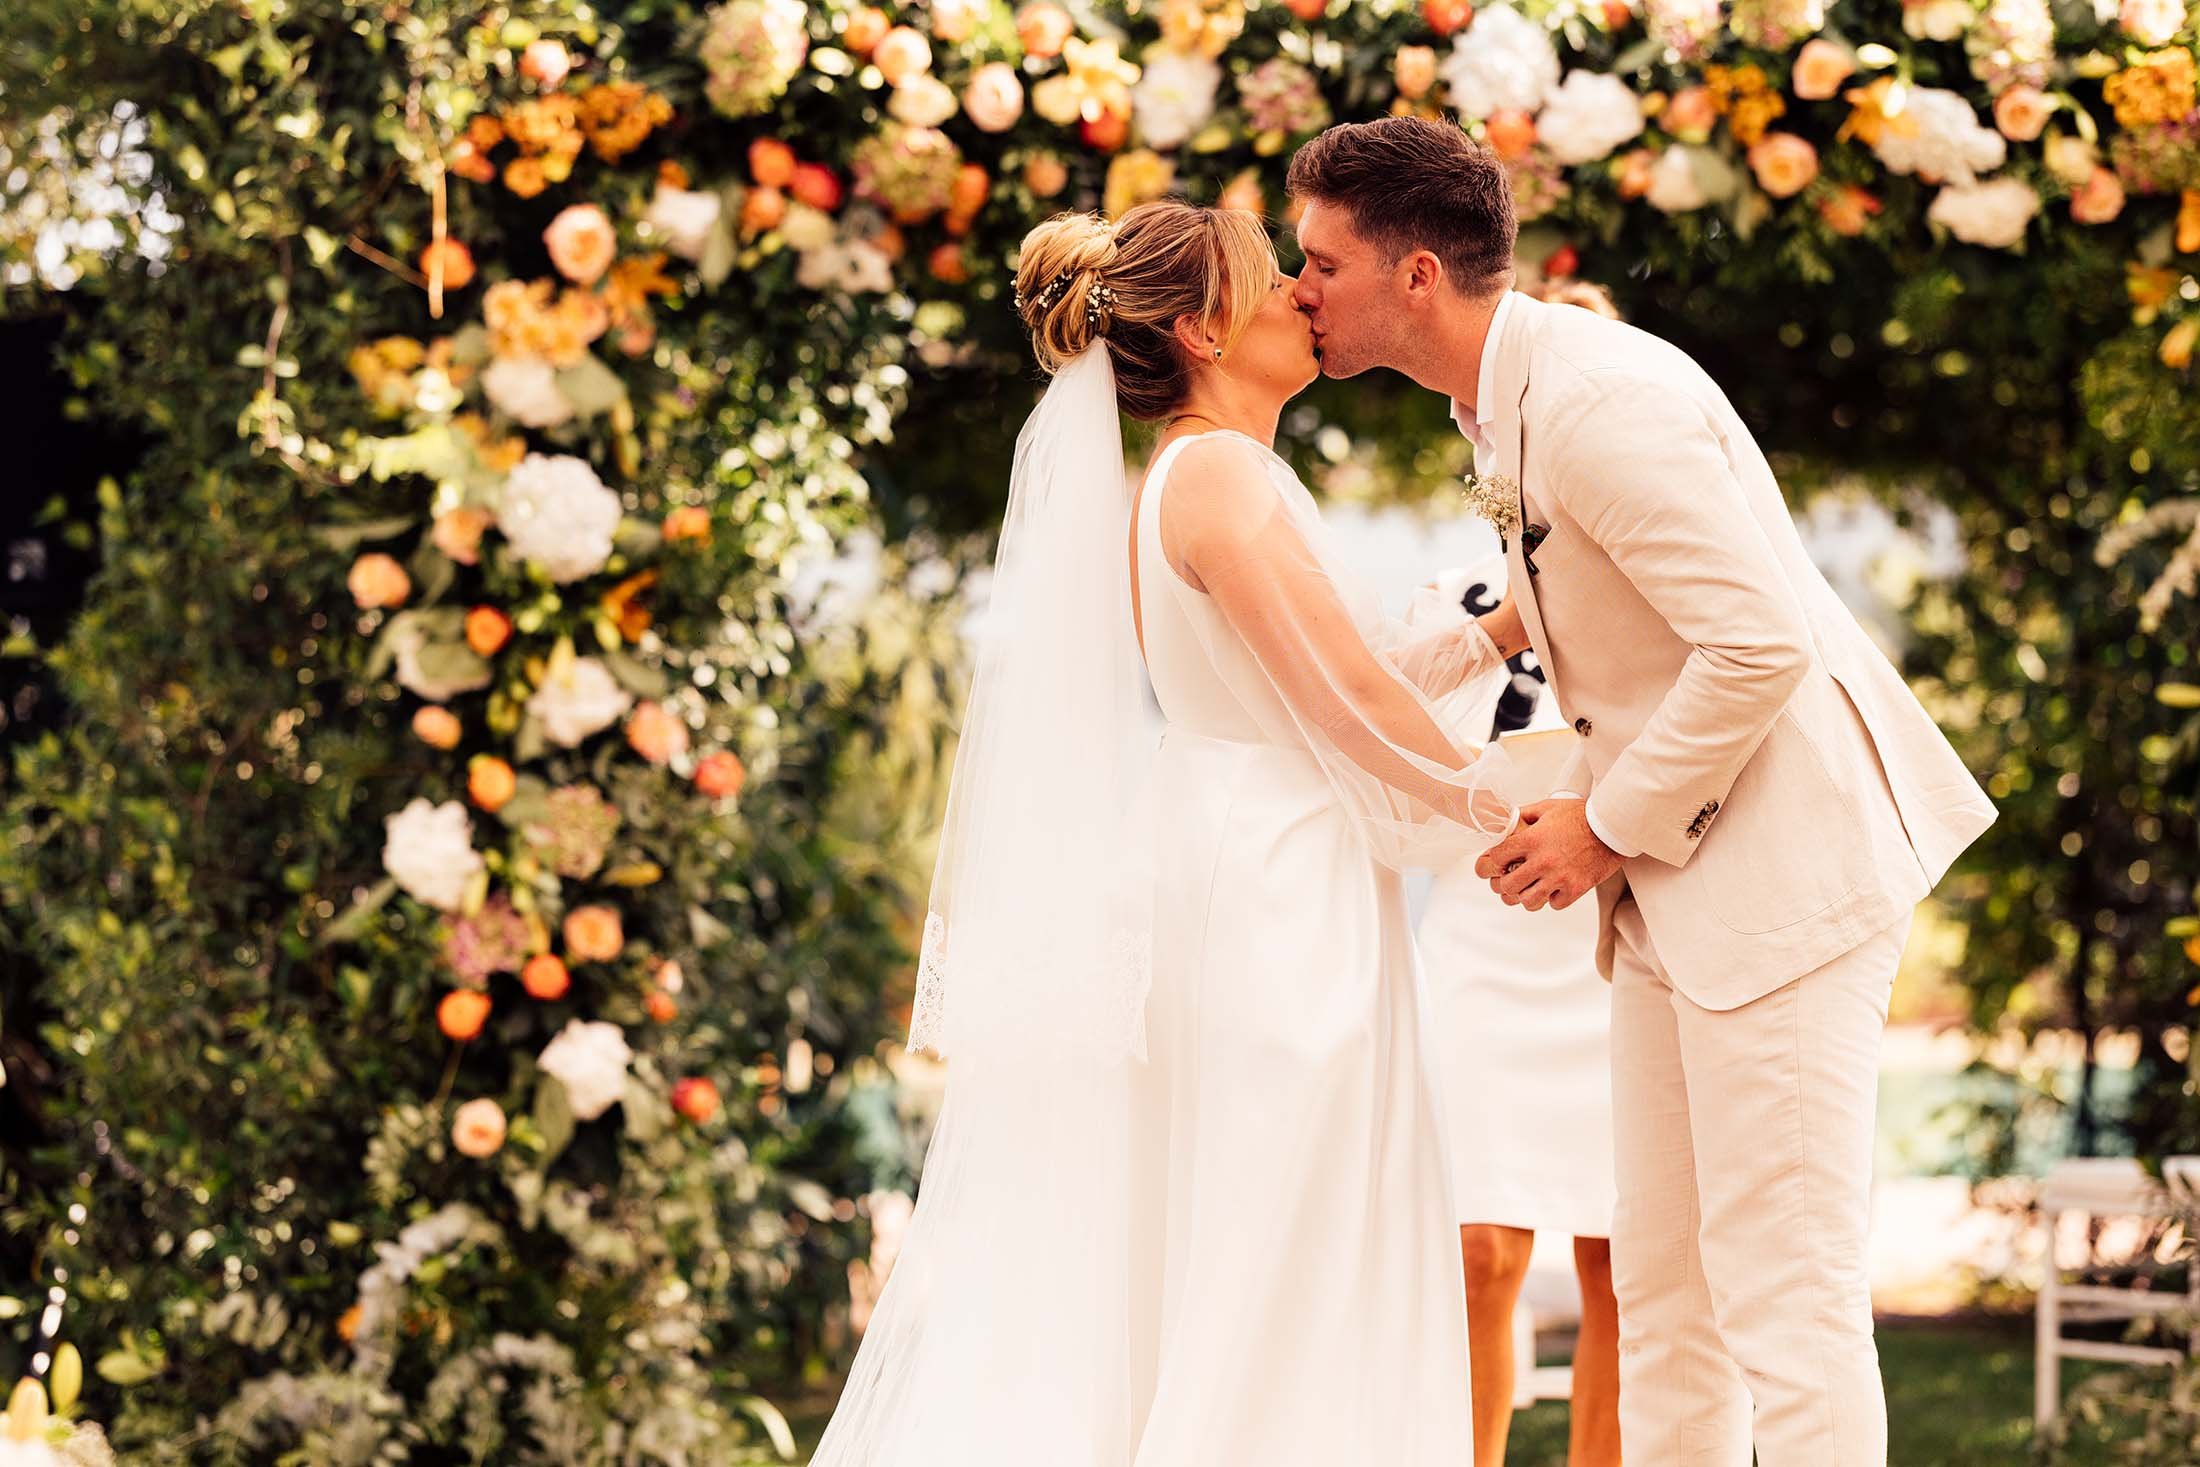 couple share first kiss next to colourful flower arch at spain wedding